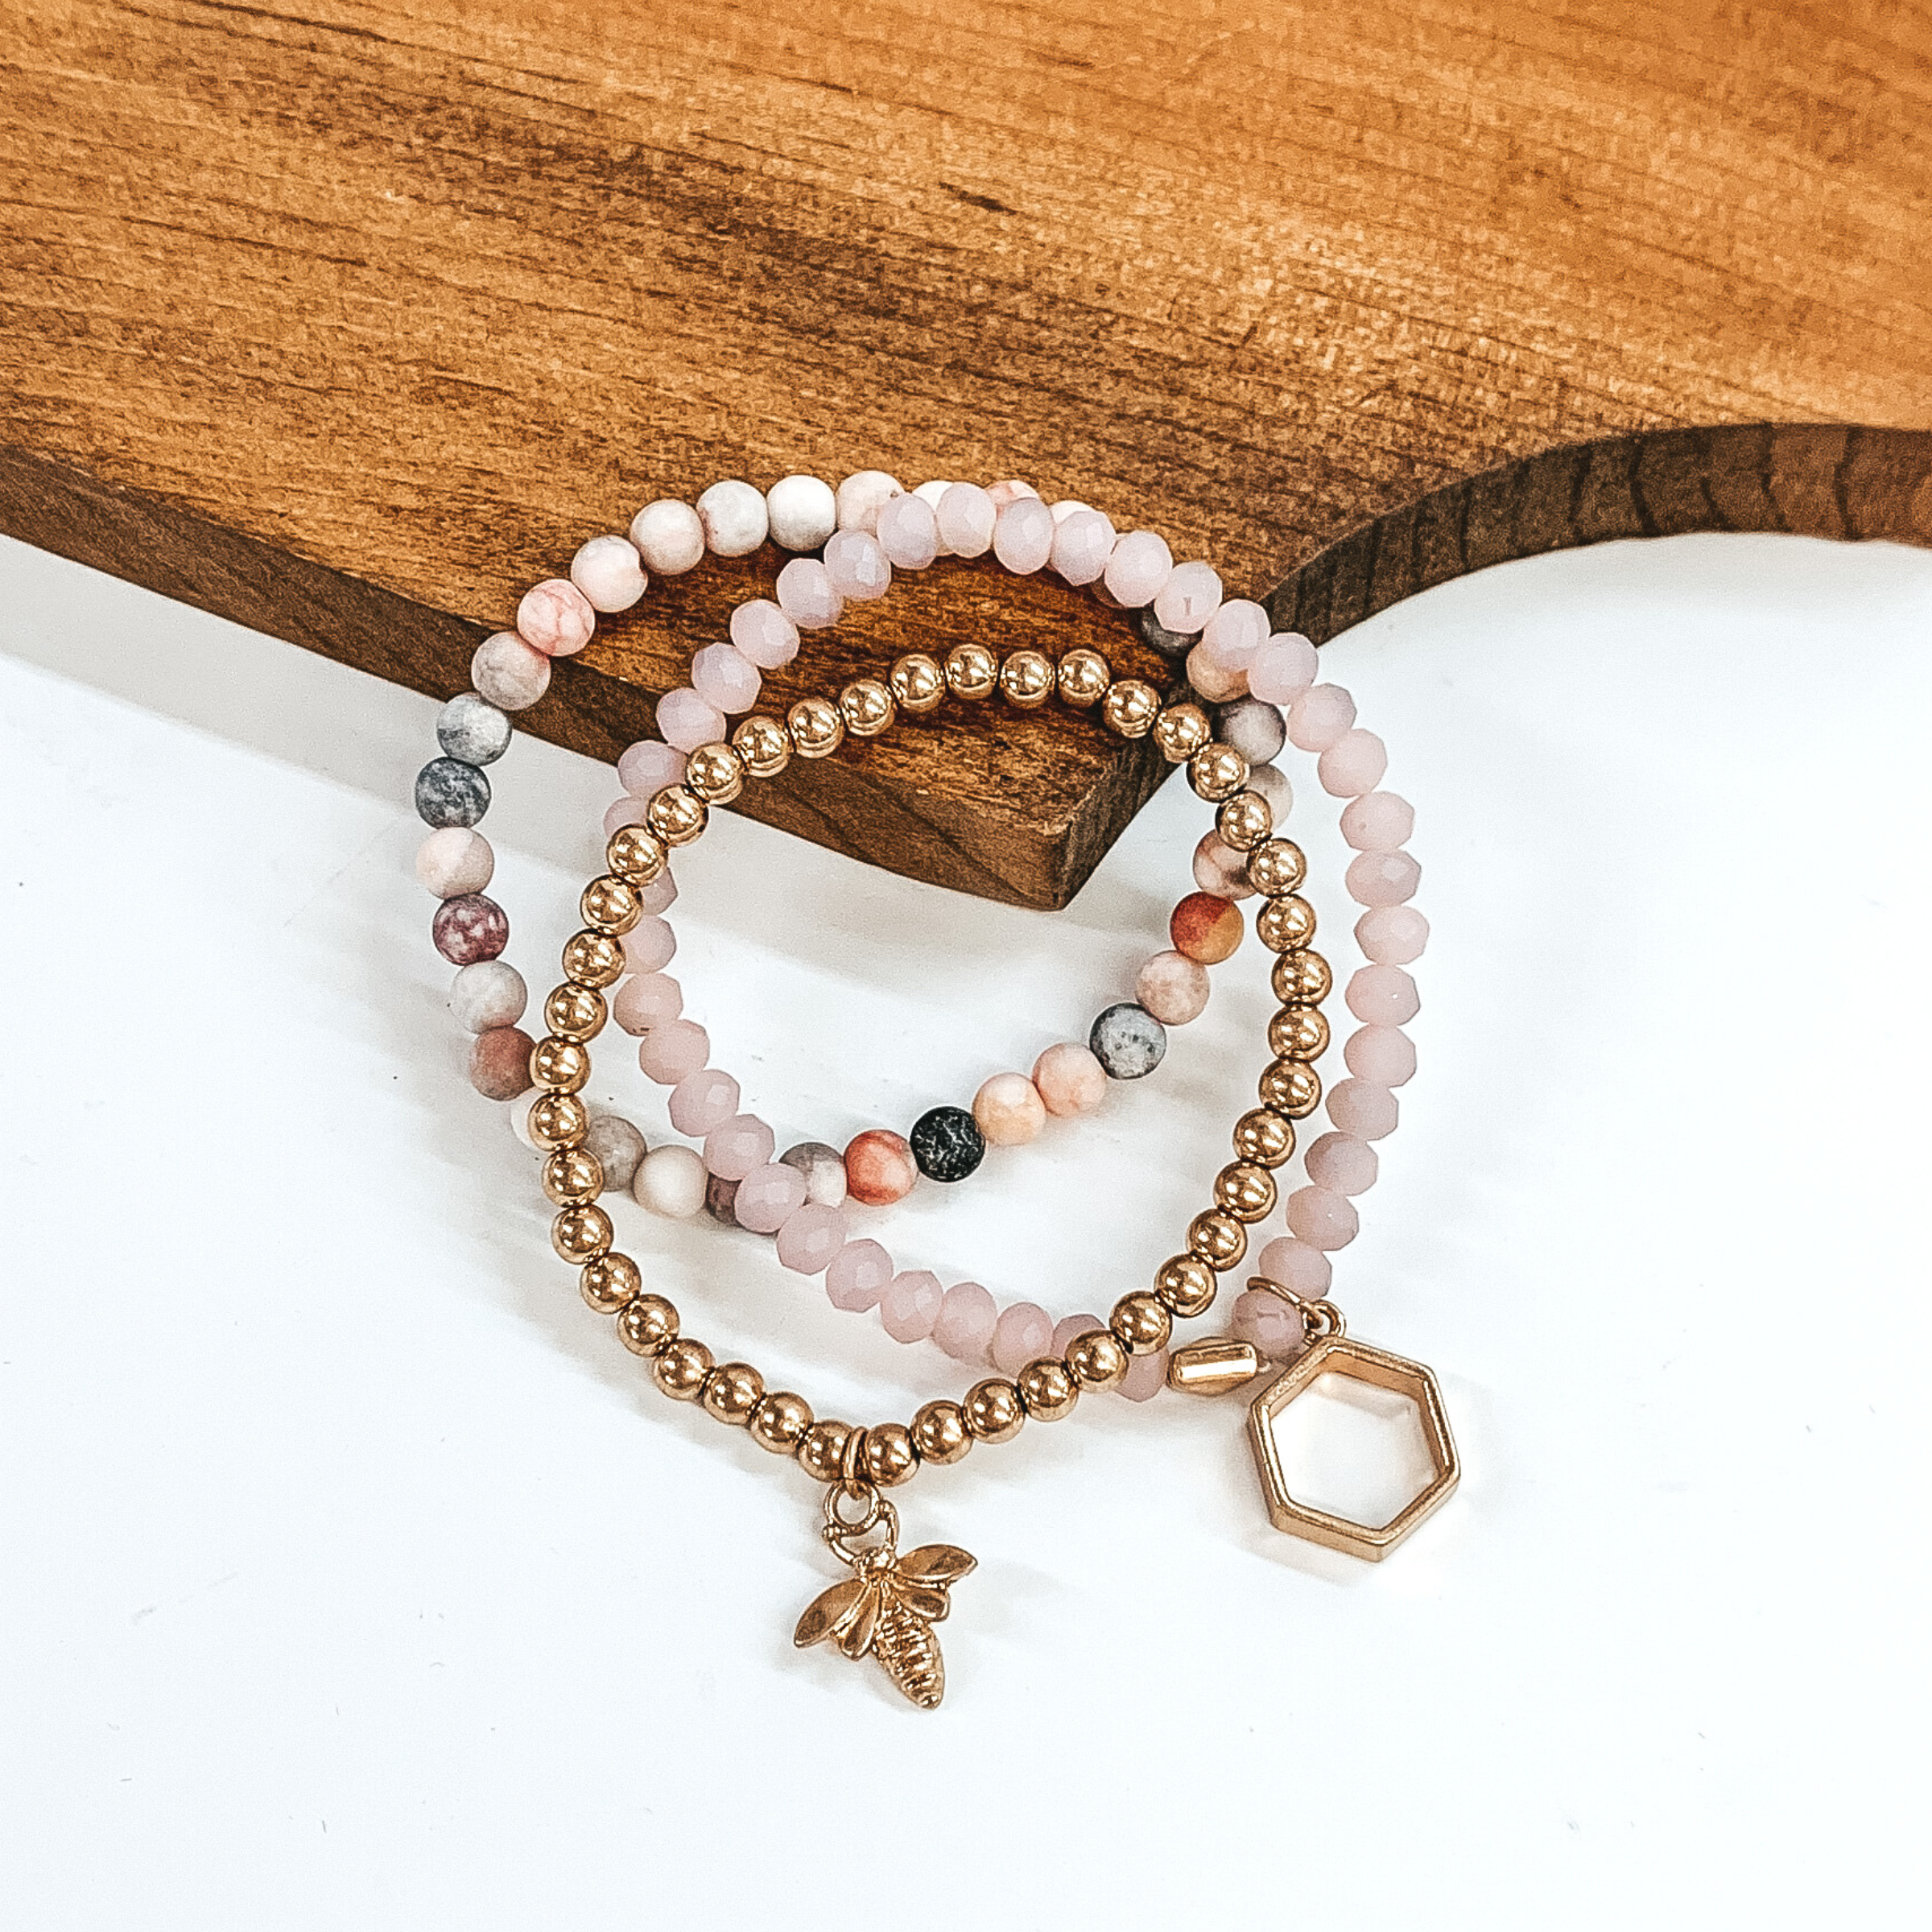 Set of three beaded bracelets with a gold bee pendant and a gold hexagon pendant. This set includes a light blush bracelet, a pink marbled beaded bracelet, and a gold beaded bracelet. These bracelets are pictured leaning on a brown block on a white background. 